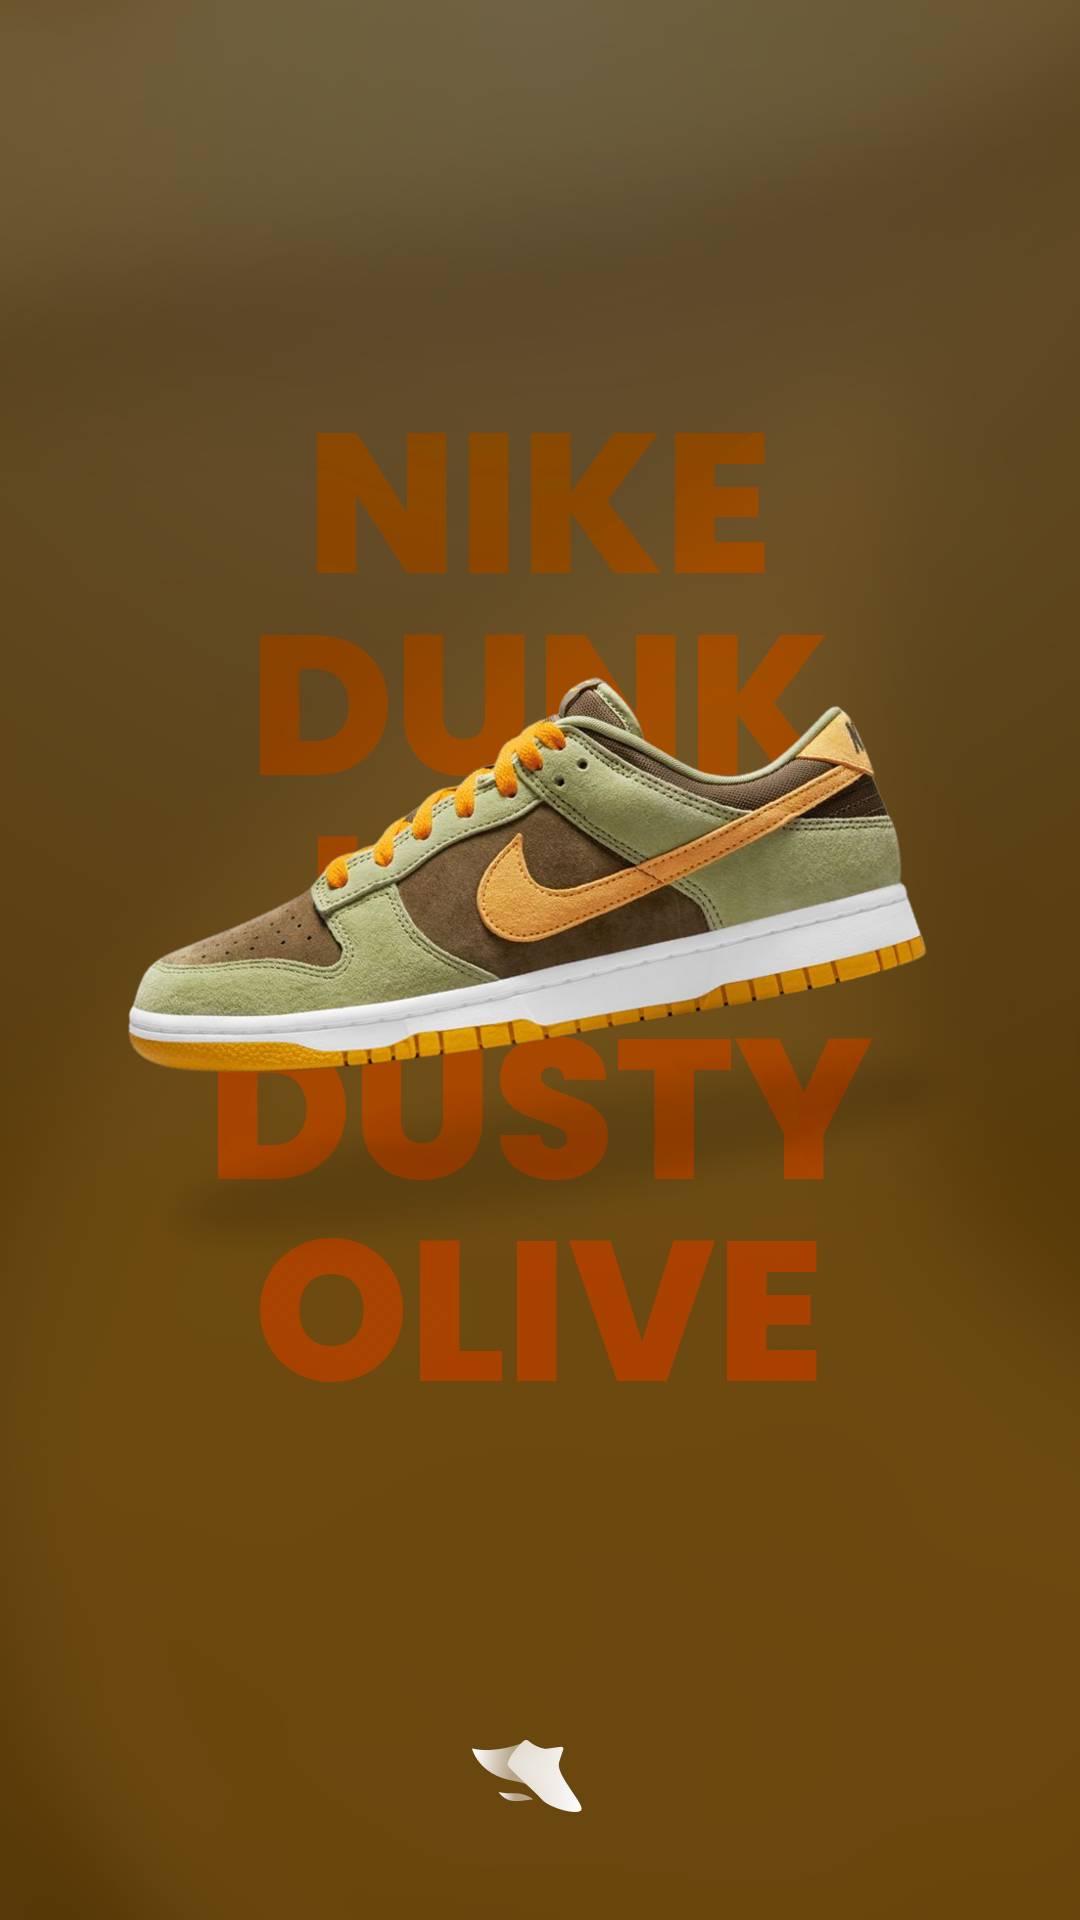 Dusty Olive 🫒 : r/Sneakers